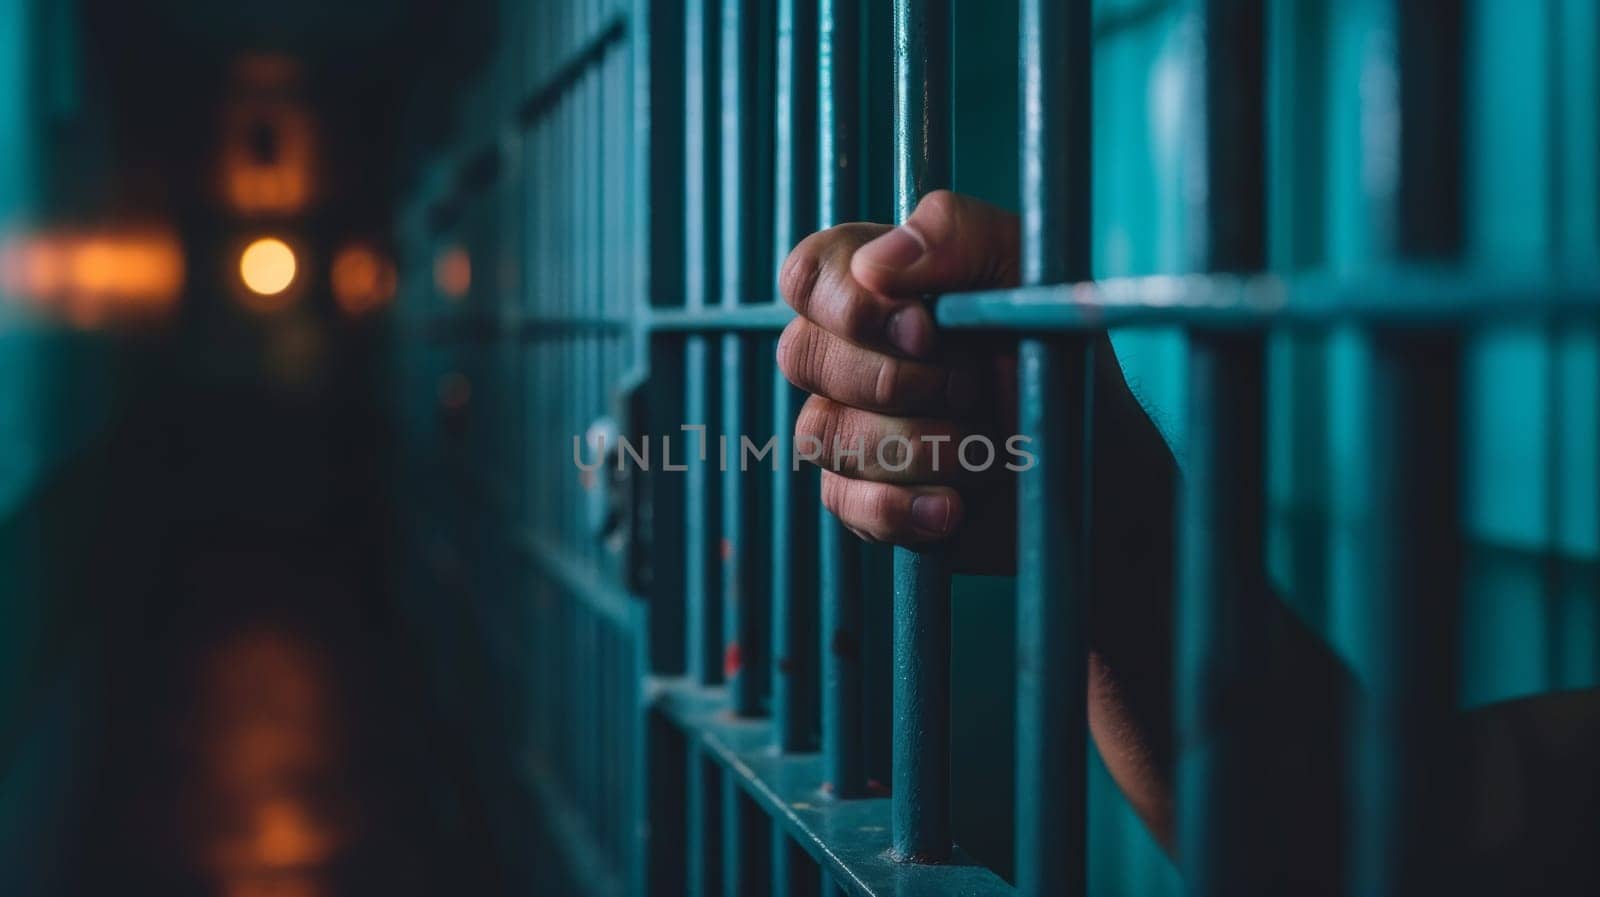 A person's hand is behind bars in a jail cell